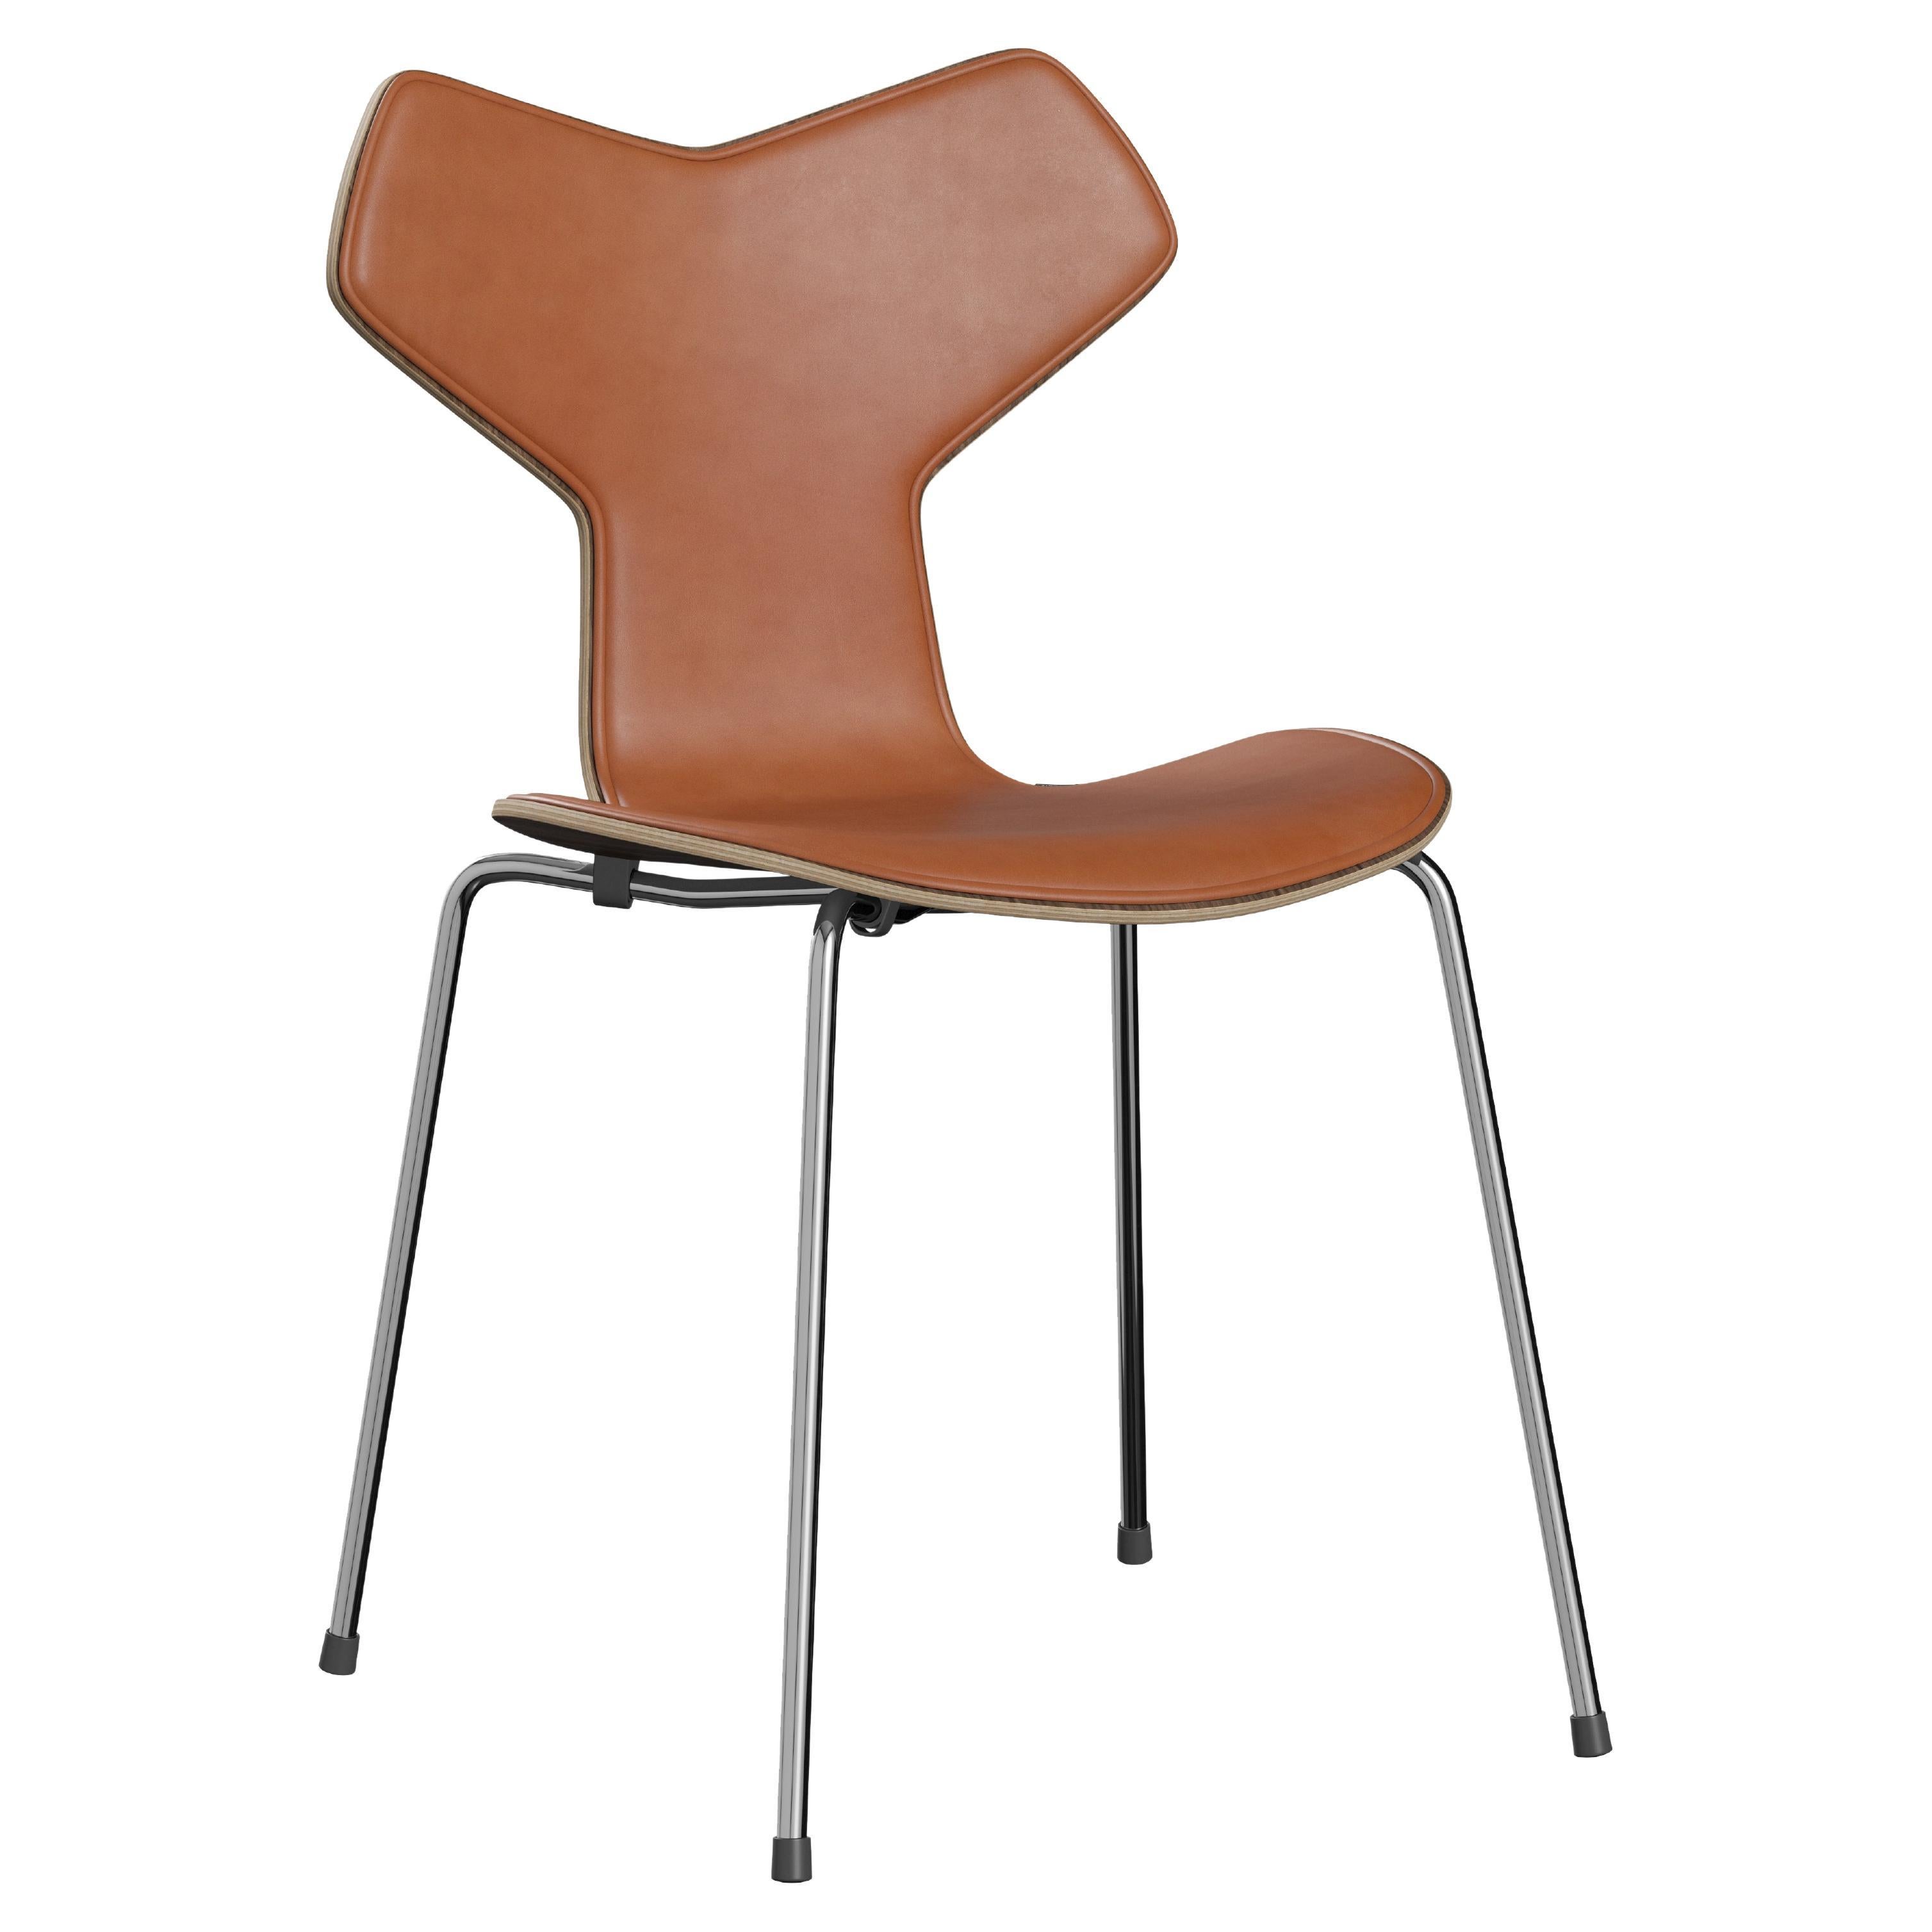 Arne Jacobsen 'Grand Prix' Chair for Fritz Hansen in Partial Leather Upholstery